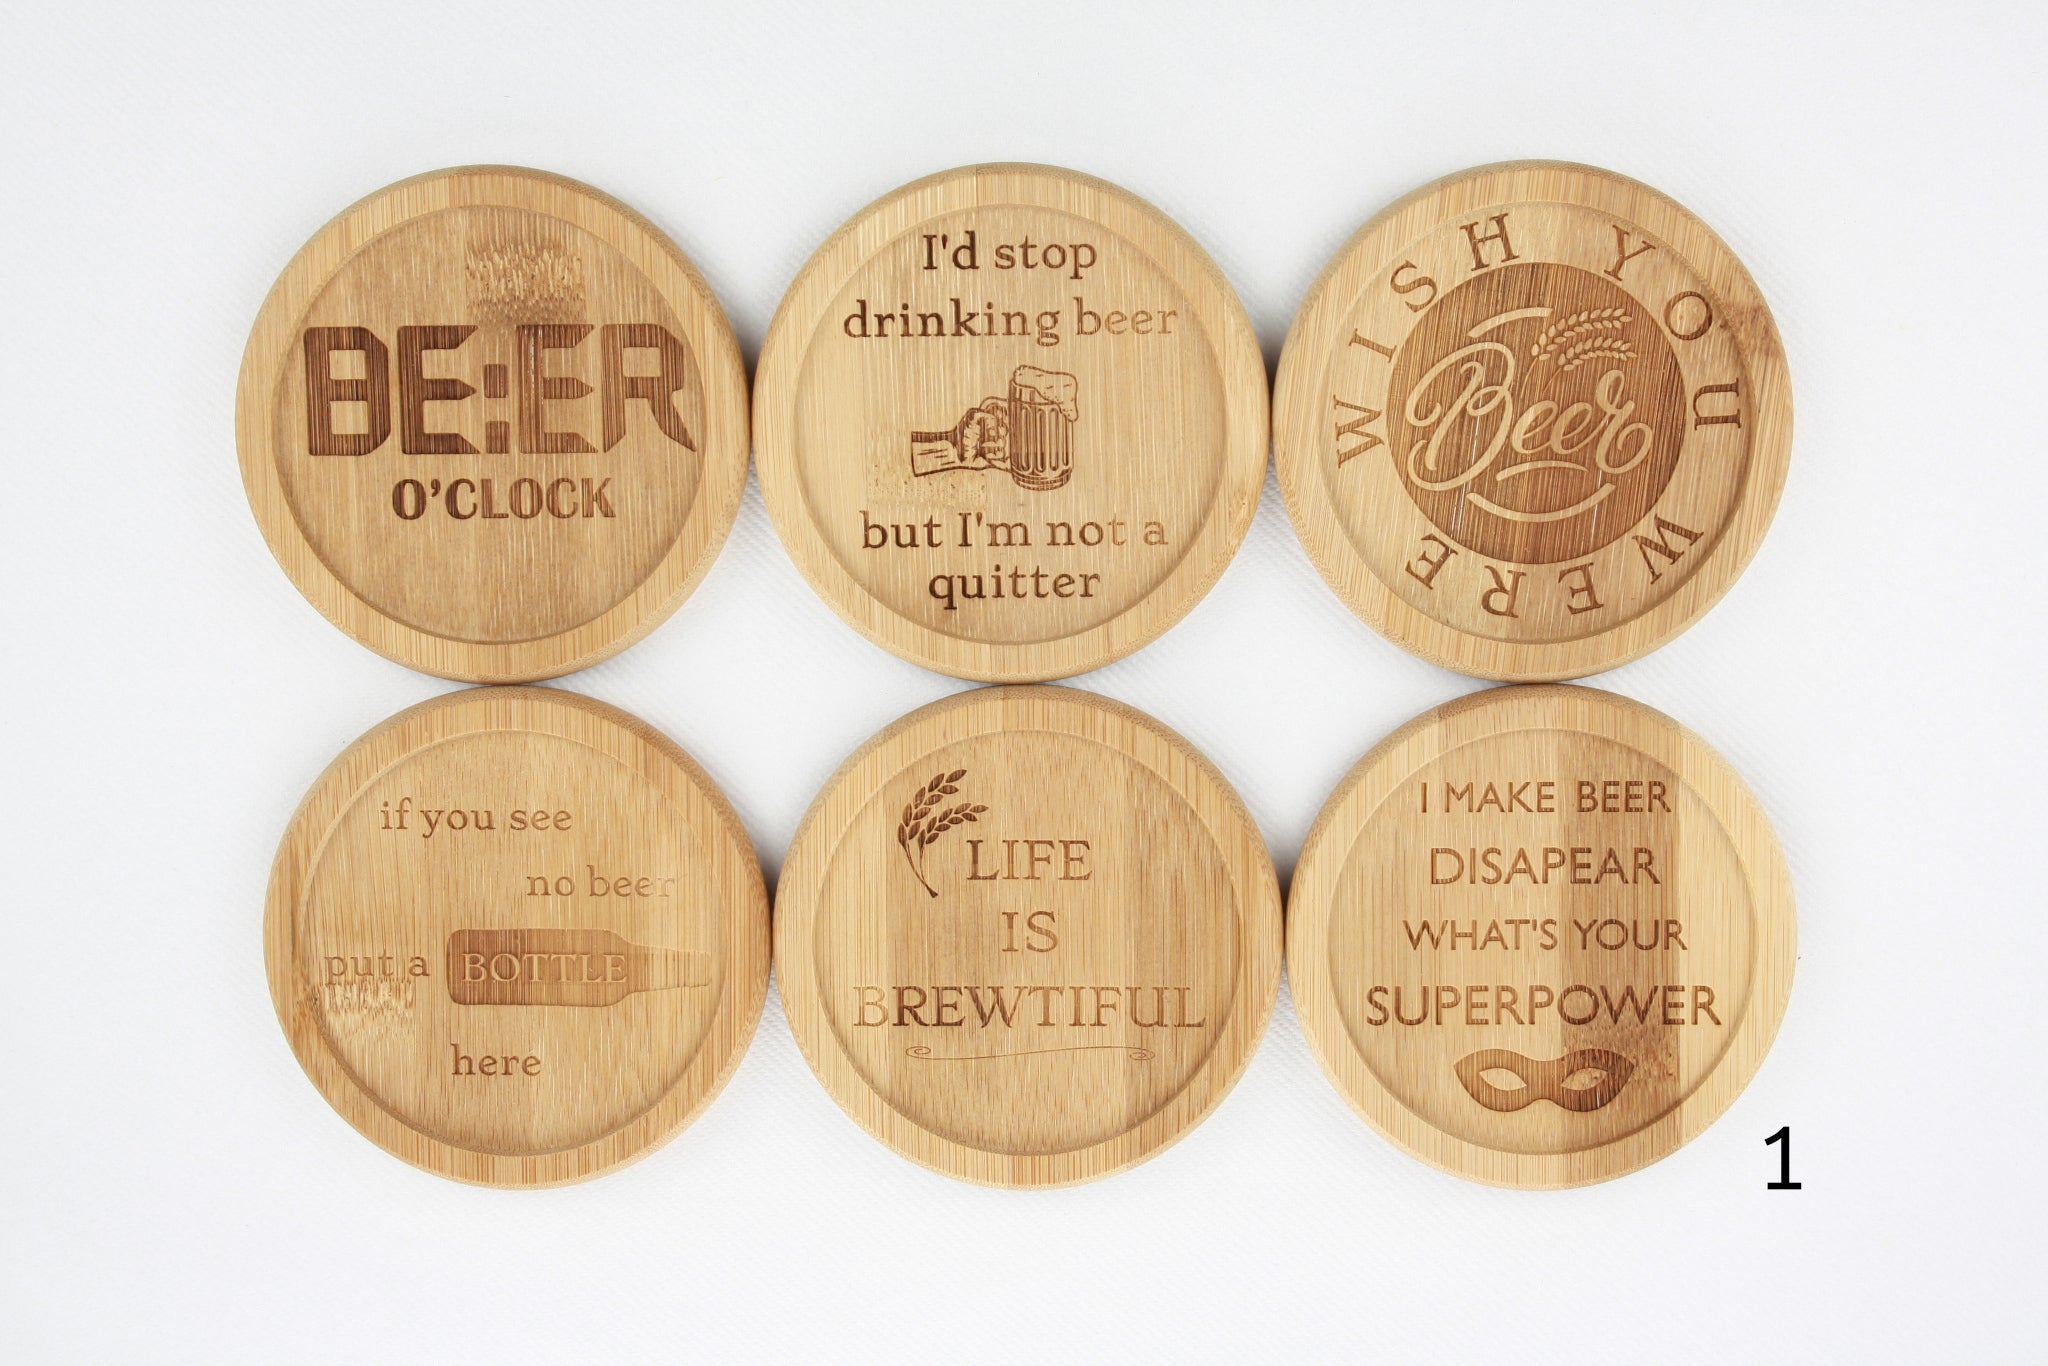 Bamboe onderleggers met bier quotes. 'Beer O'clock', 'I'd stop drinking beer but I'm not a quitter', 'Wish you were beer', 'If you see no beer, put a bottle here', 'Life is brewtiful', 'I make beer disapear, what's your superpower'.